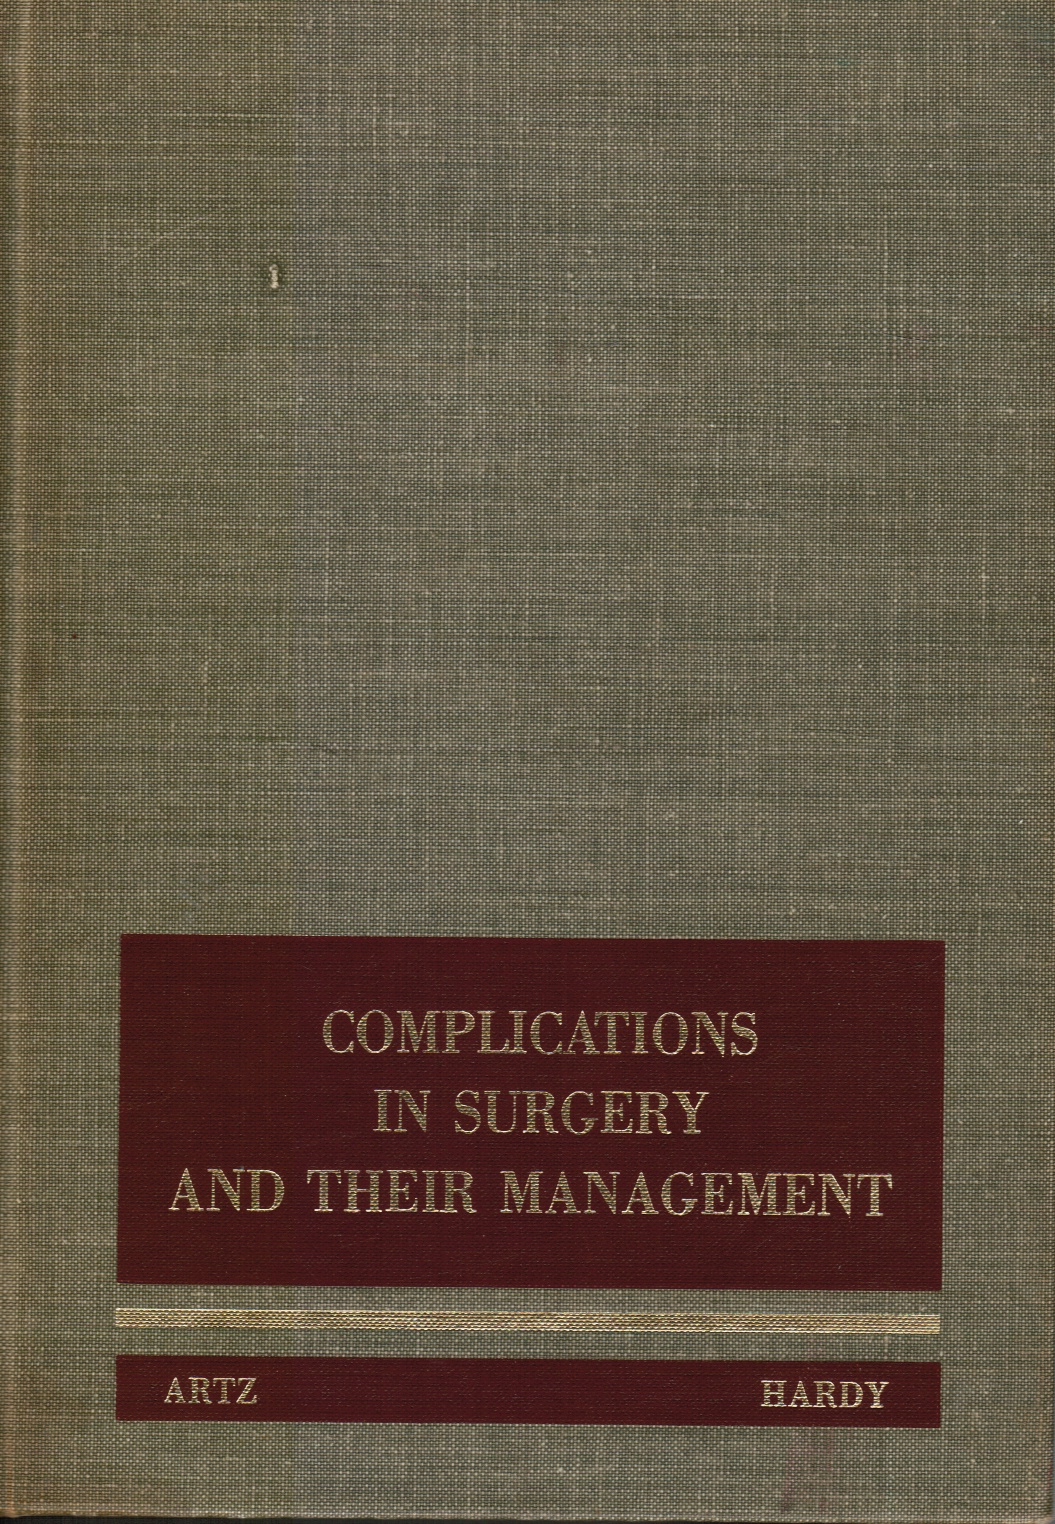 ARTZ, CURTIS P; JAMES D. HARDY - Complications in Surgery and Their Management